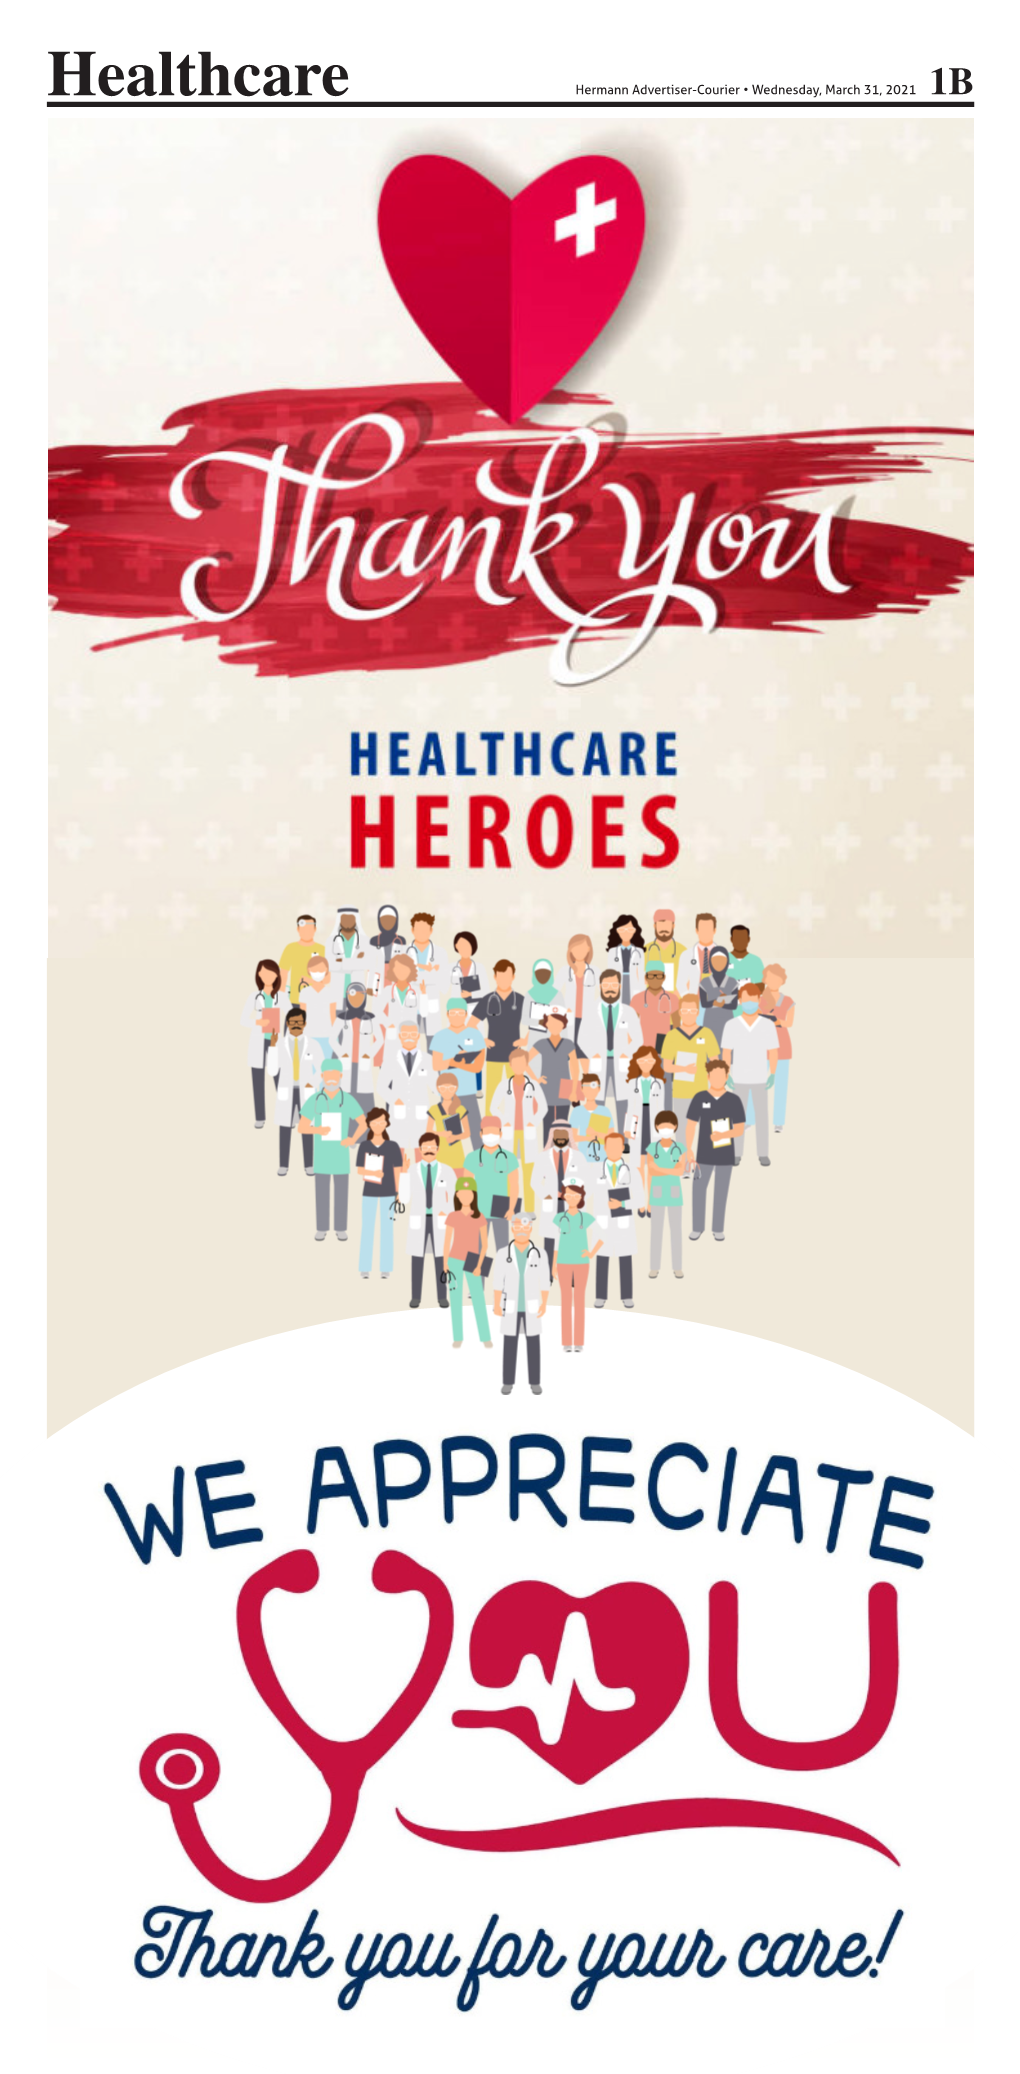 Healthcare Hermann Advertiser-Courier • Wednesday, March 31, 2021 1B Healthcare Hermann Advertiser-Courier • Wednesday, March 31, 2021 2B